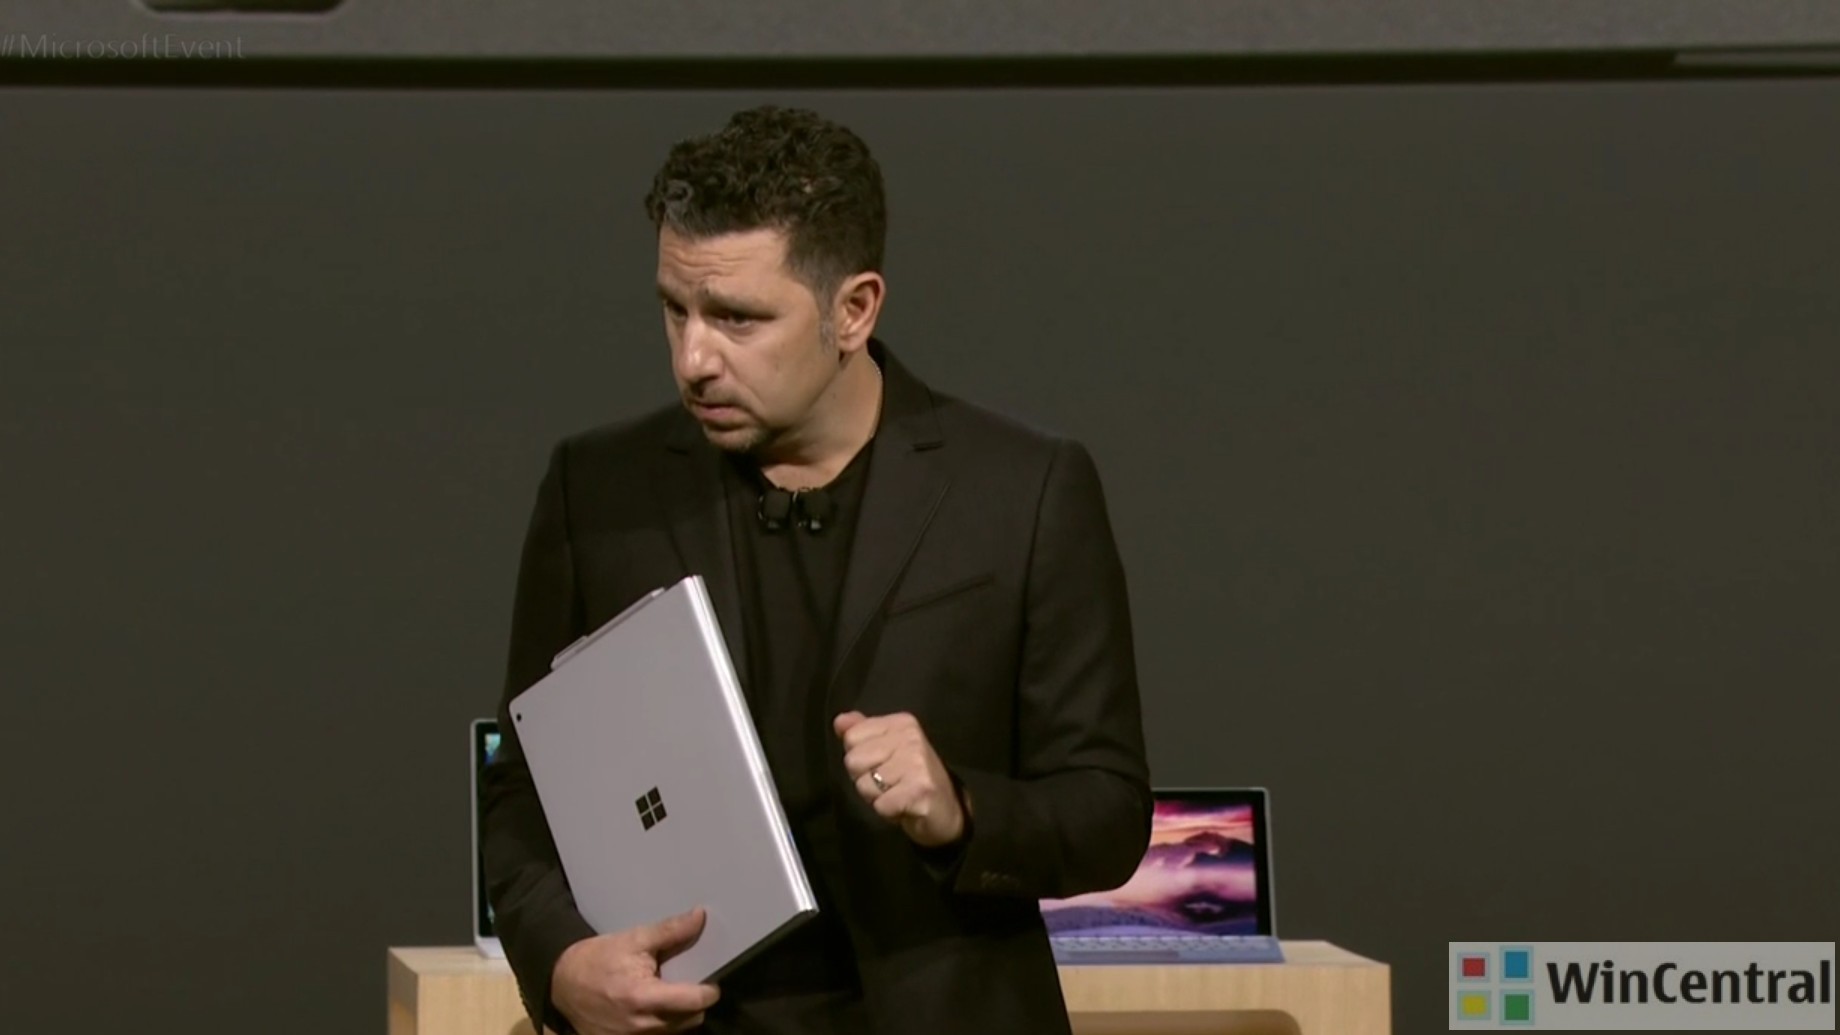 Panos Panay holding a Surface device